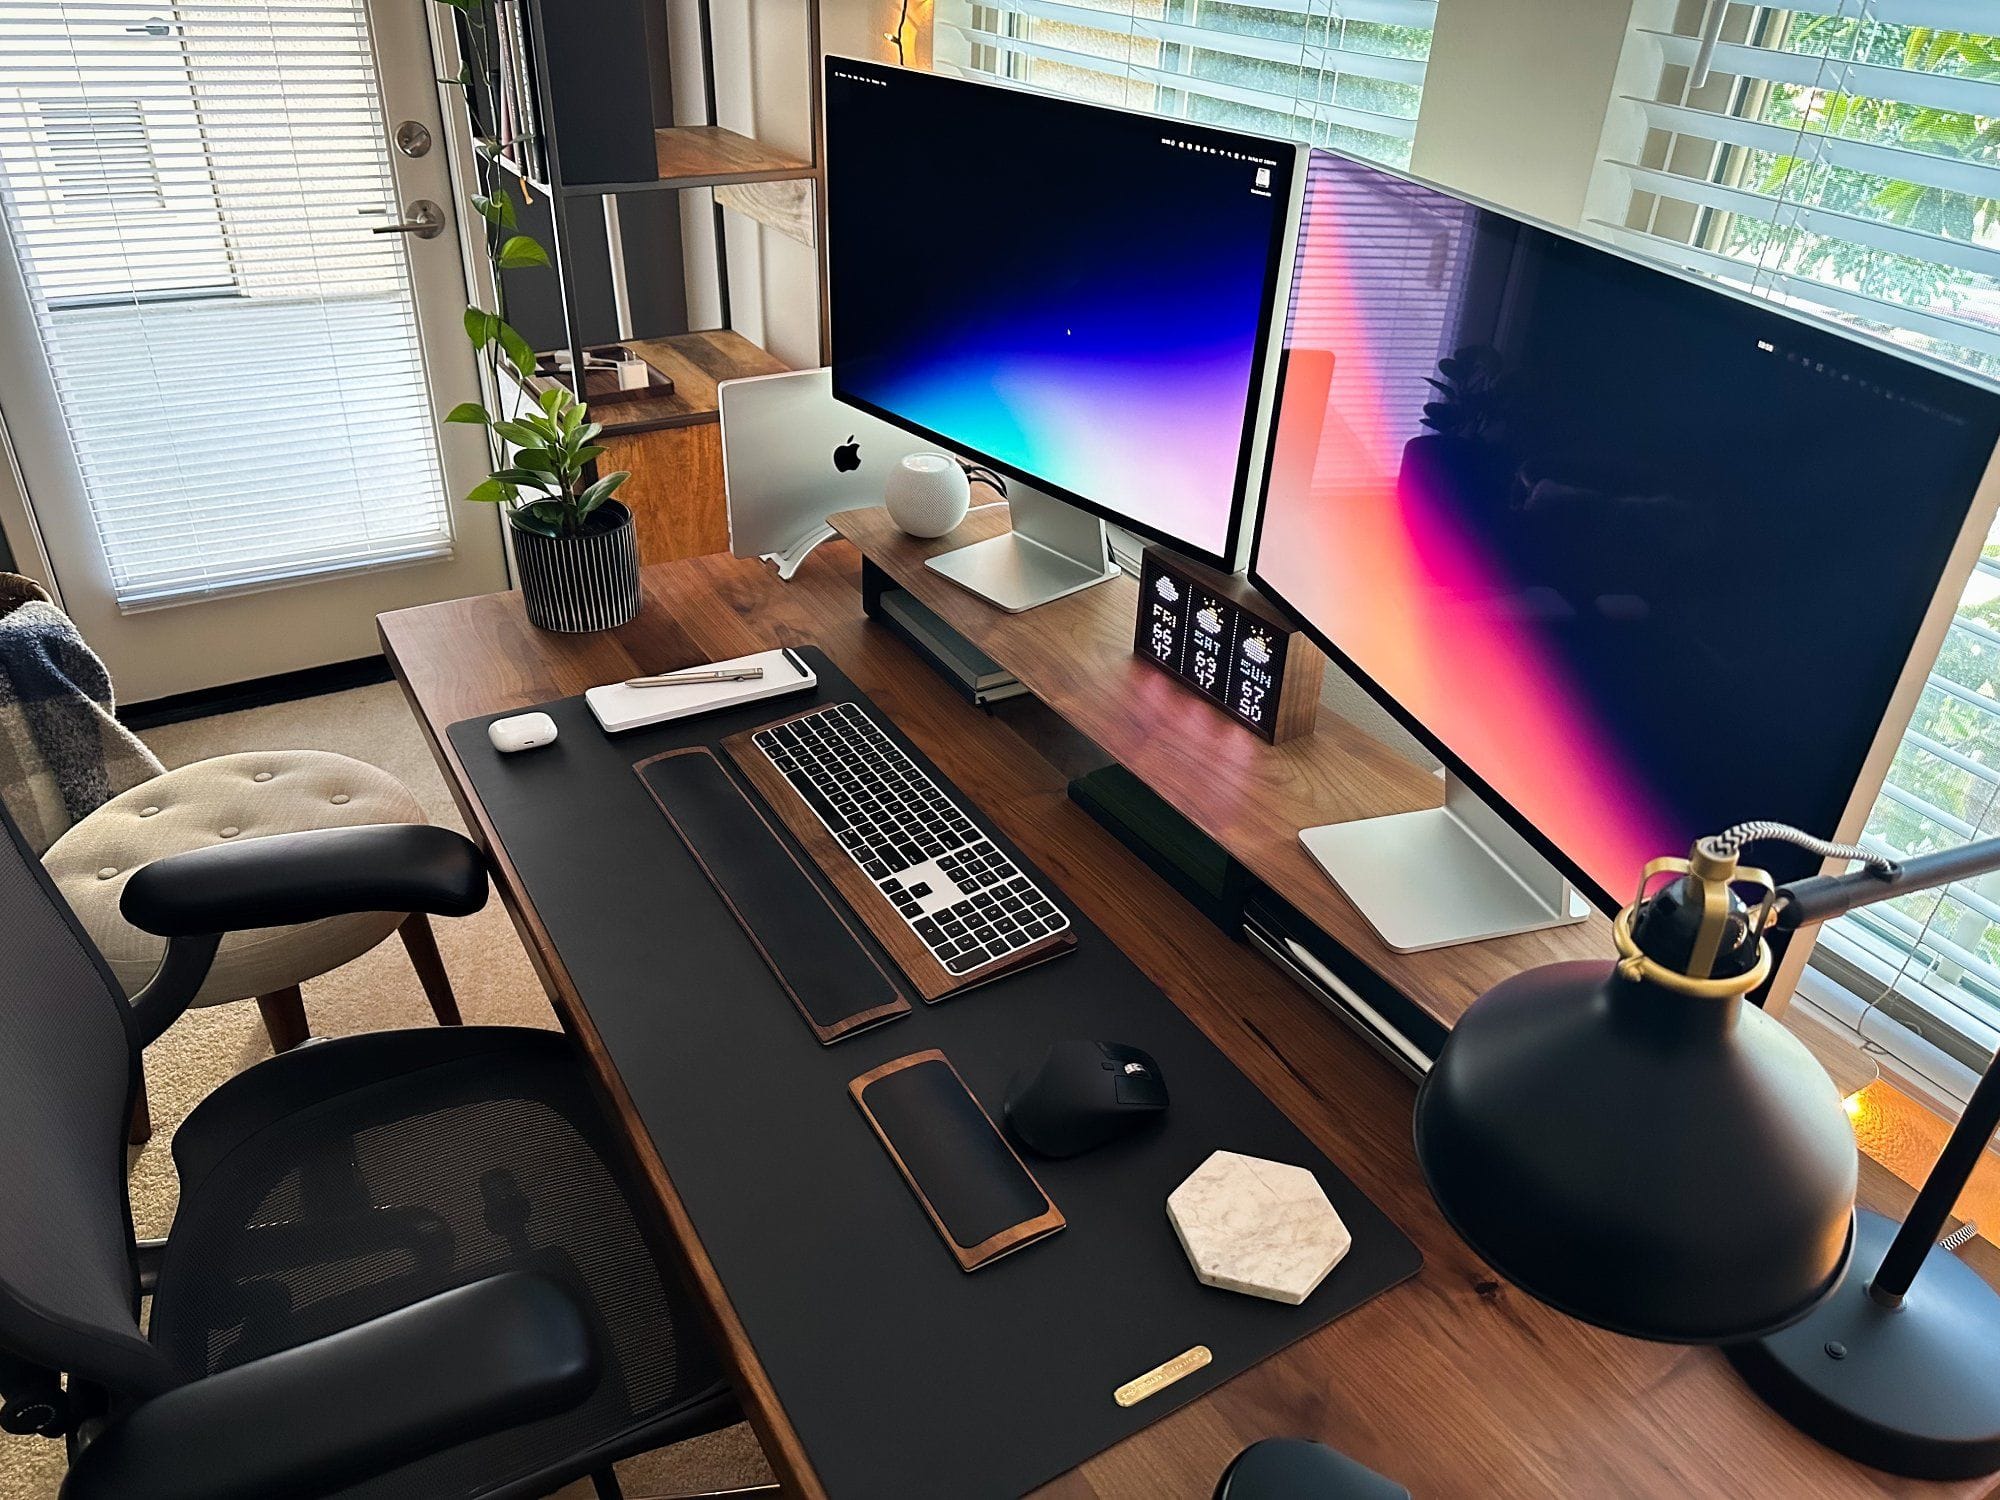 An inviting workspace with a dual monitor setup, featuring an iMac, a MacBook Pro on a desk mat with a wooden accent, a potted plant, a stylish desk lamp, and a comfortable ergonomic chair, all set against a backdrop of a window with white blinds